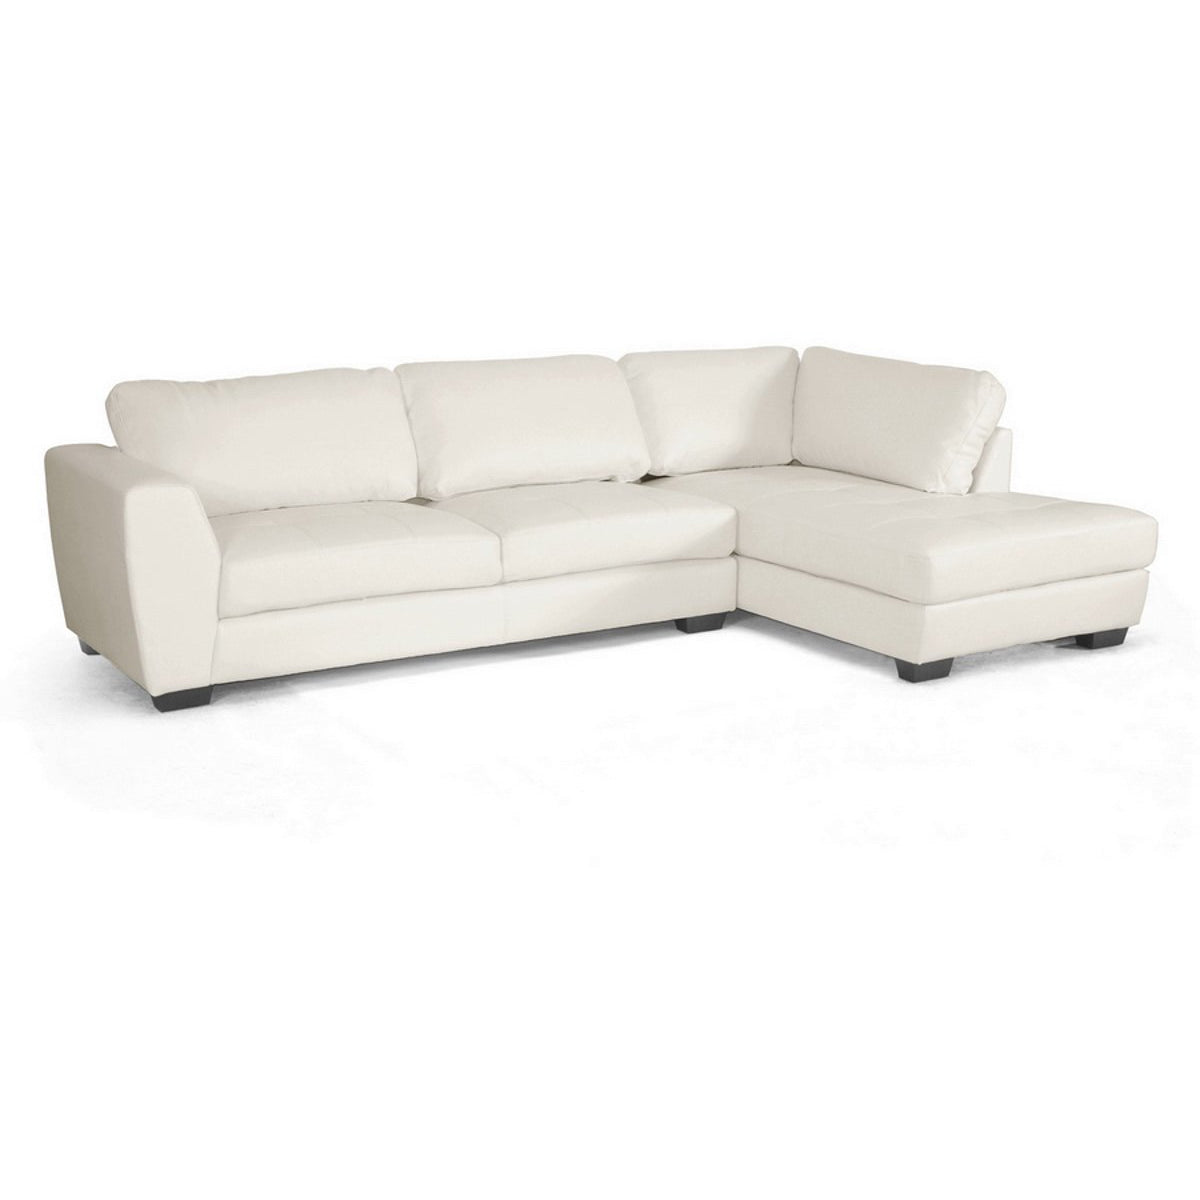 Baxton Studio Orland White Leather Modern Sectional Sofa Set with Right Facing Chaise Baxton Studio-sectionals-Minimal And Modern - 1